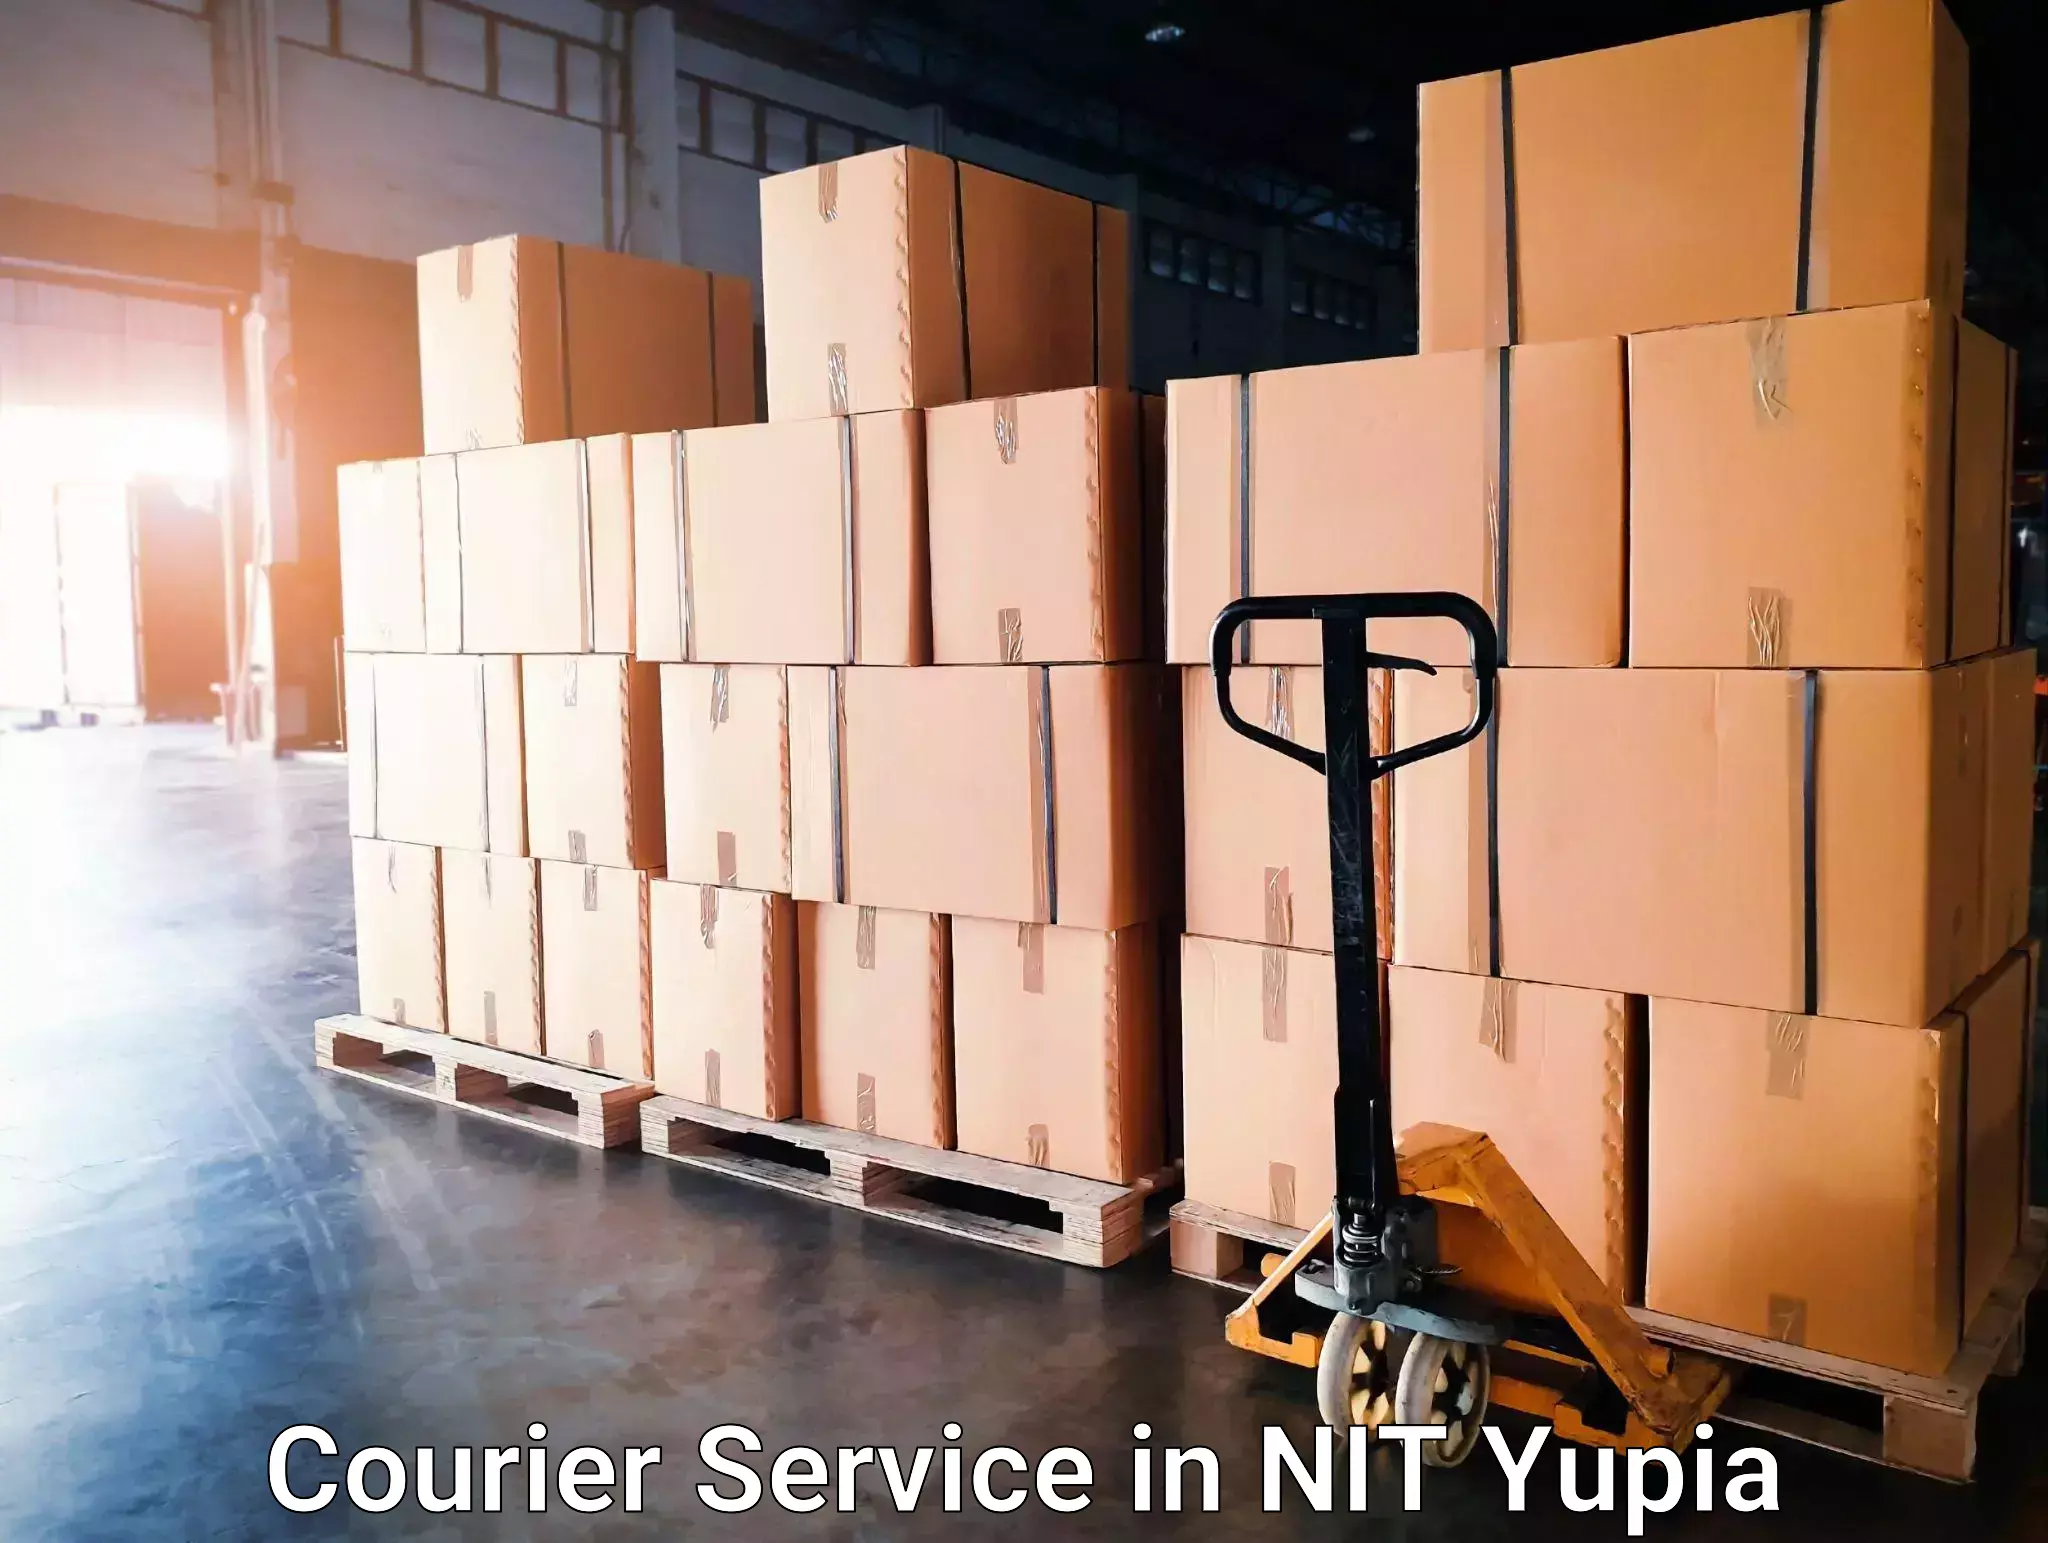 Flexible delivery schedules in NIT Yupia